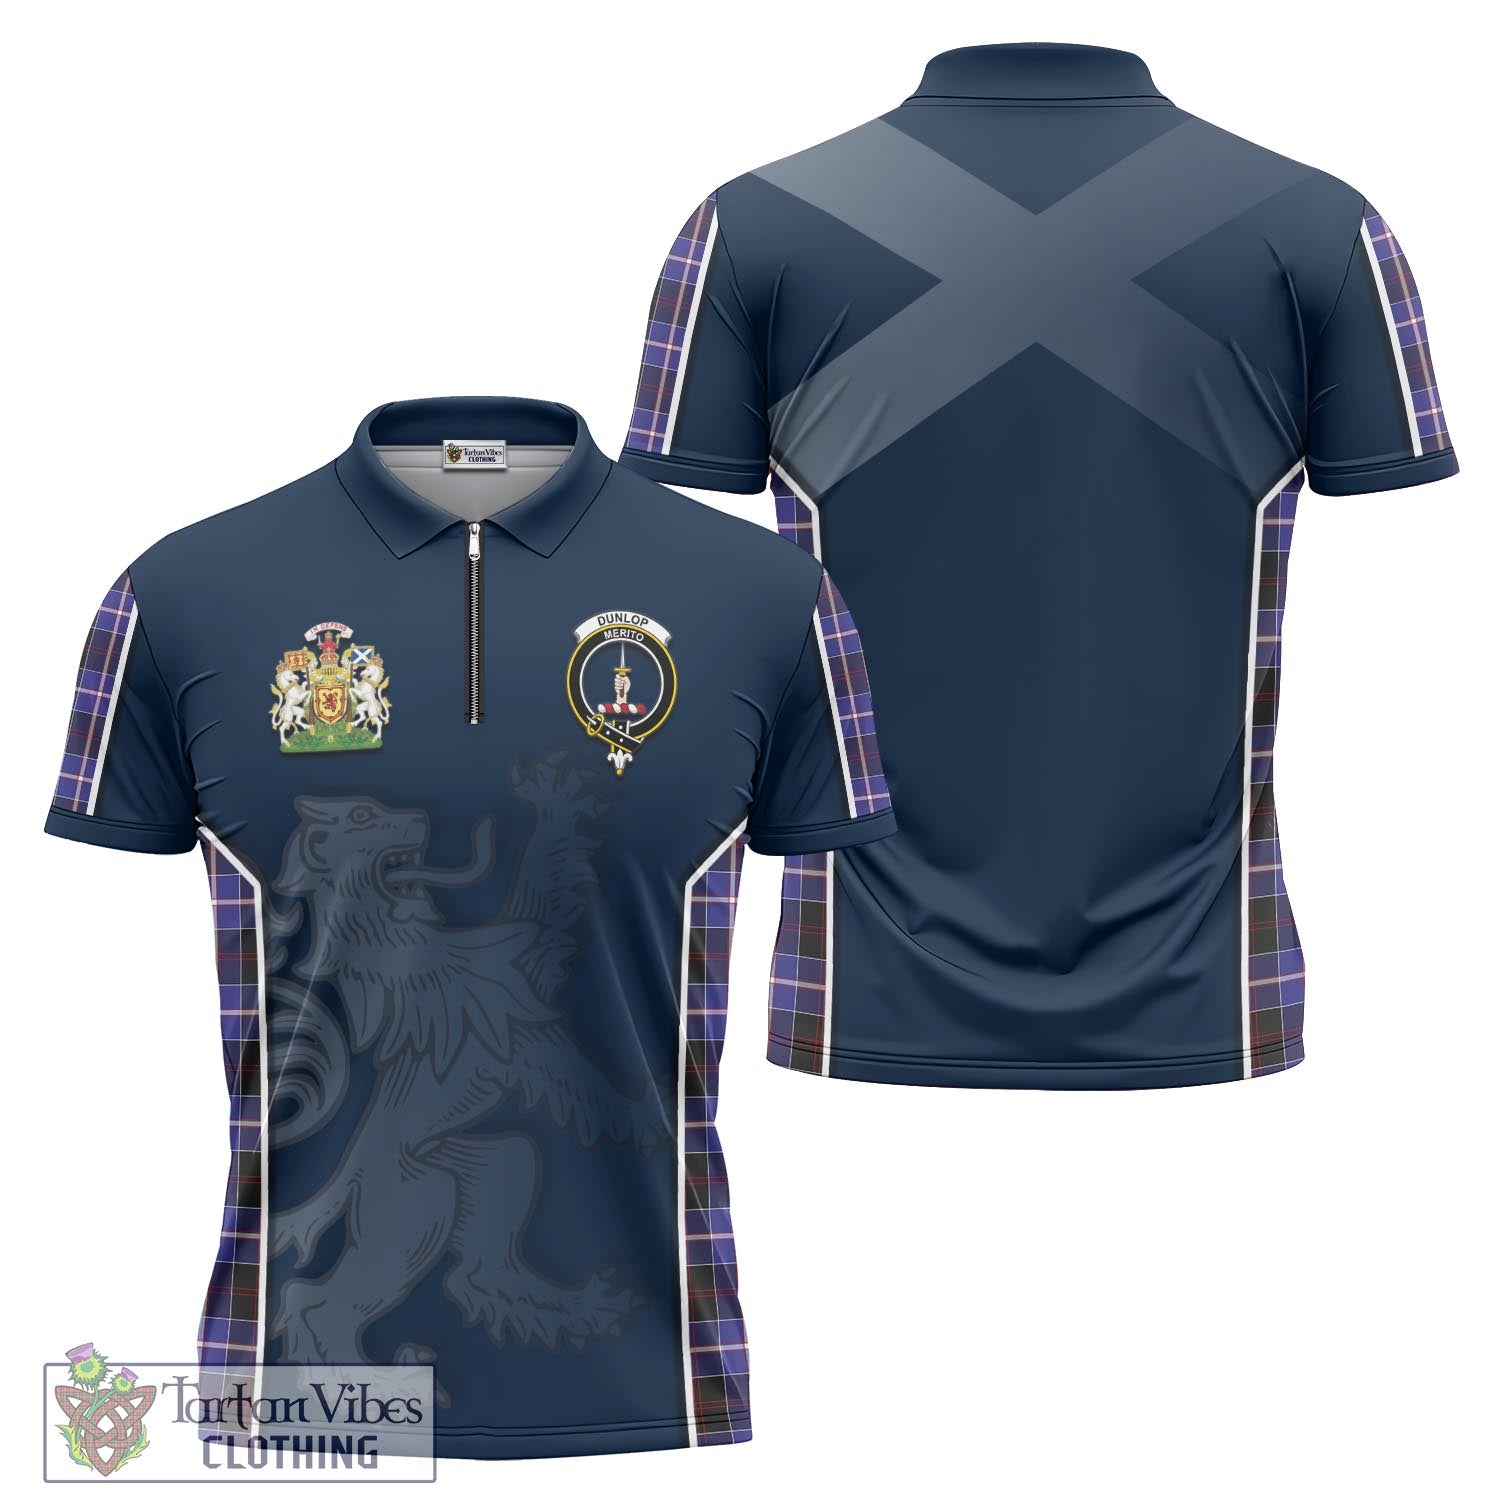 Tartan Vibes Clothing Dunlop Modern Tartan Zipper Polo Shirt with Family Crest and Lion Rampant Vibes Sport Style